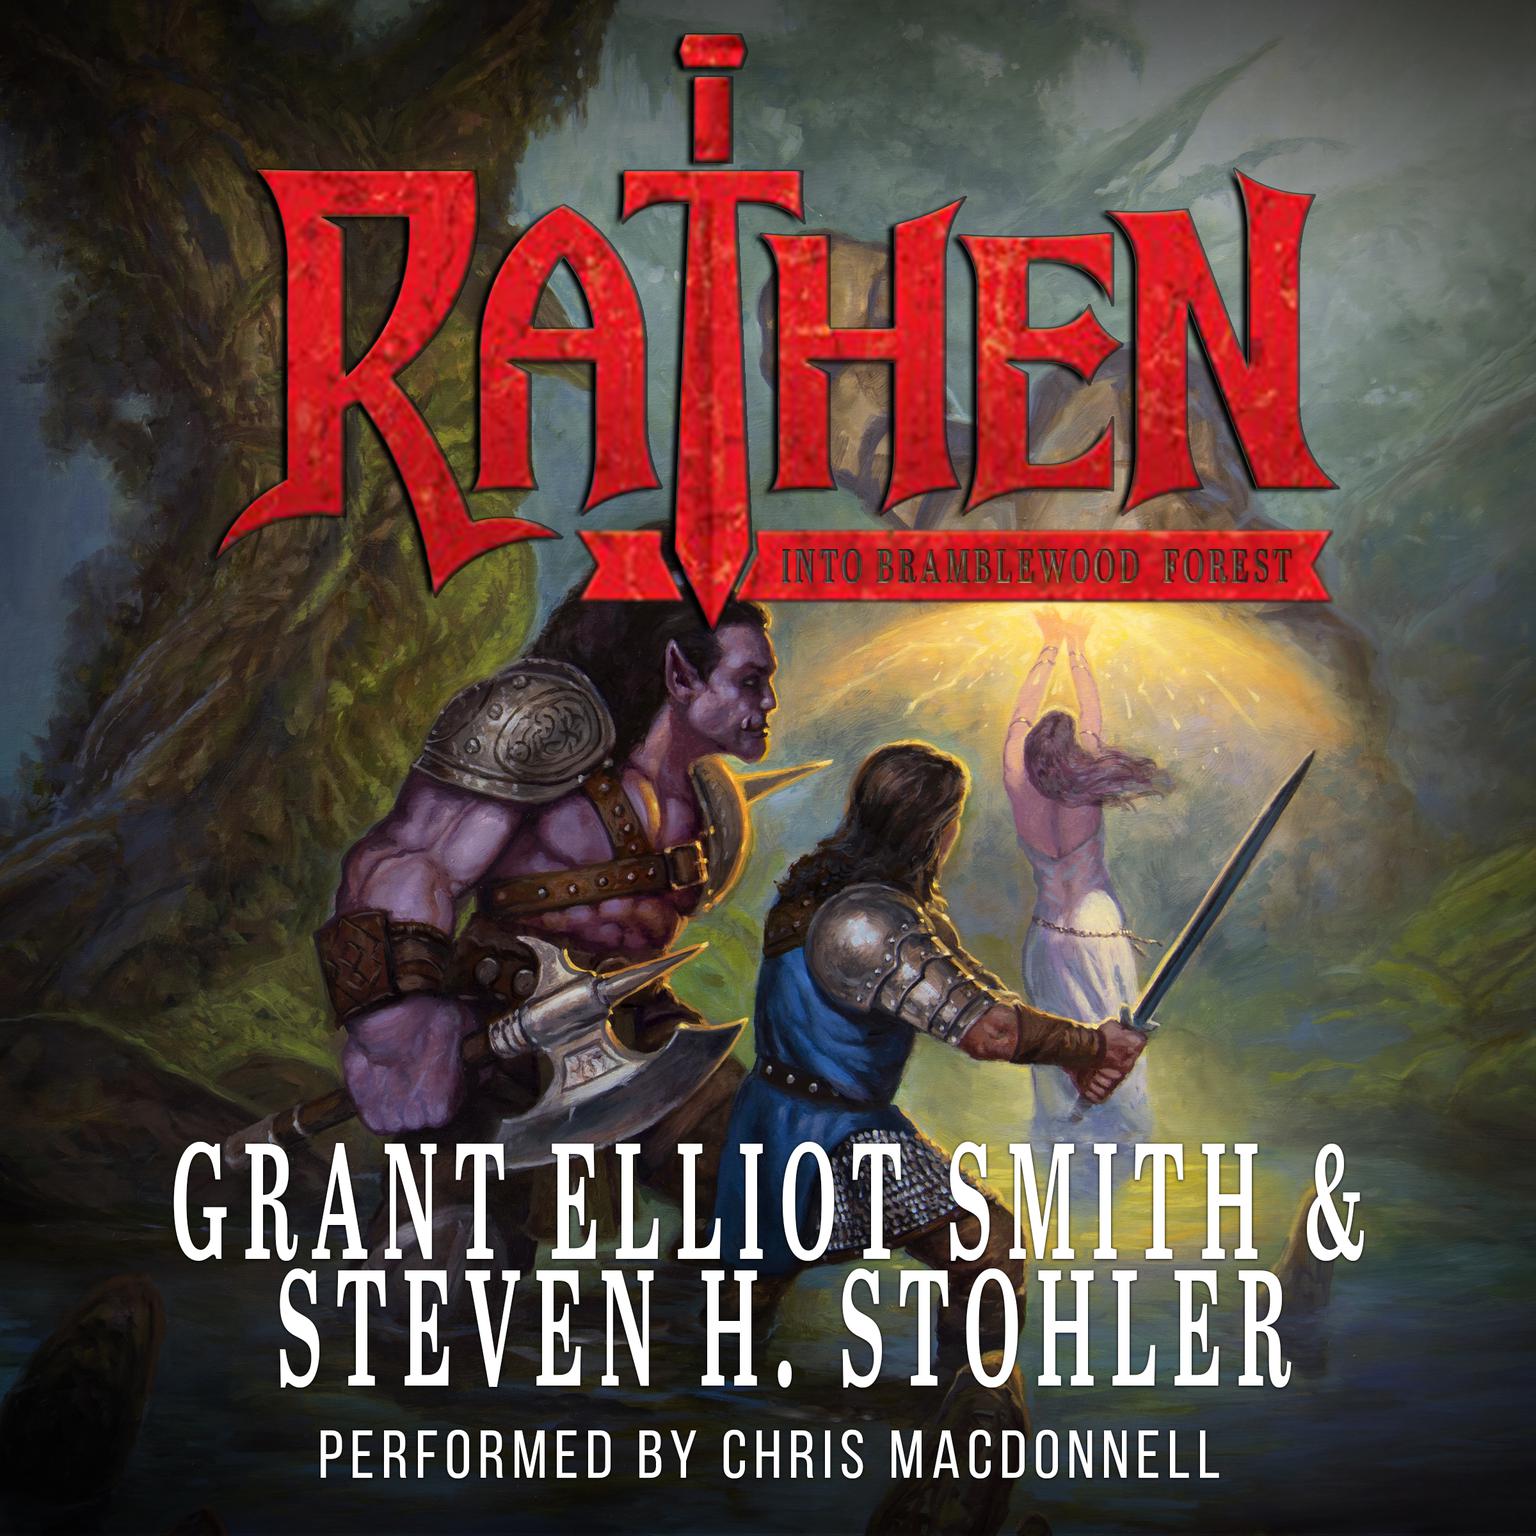 Rathen: Into Bramblewood Forest Audiobook, by Grant Elliot Smith